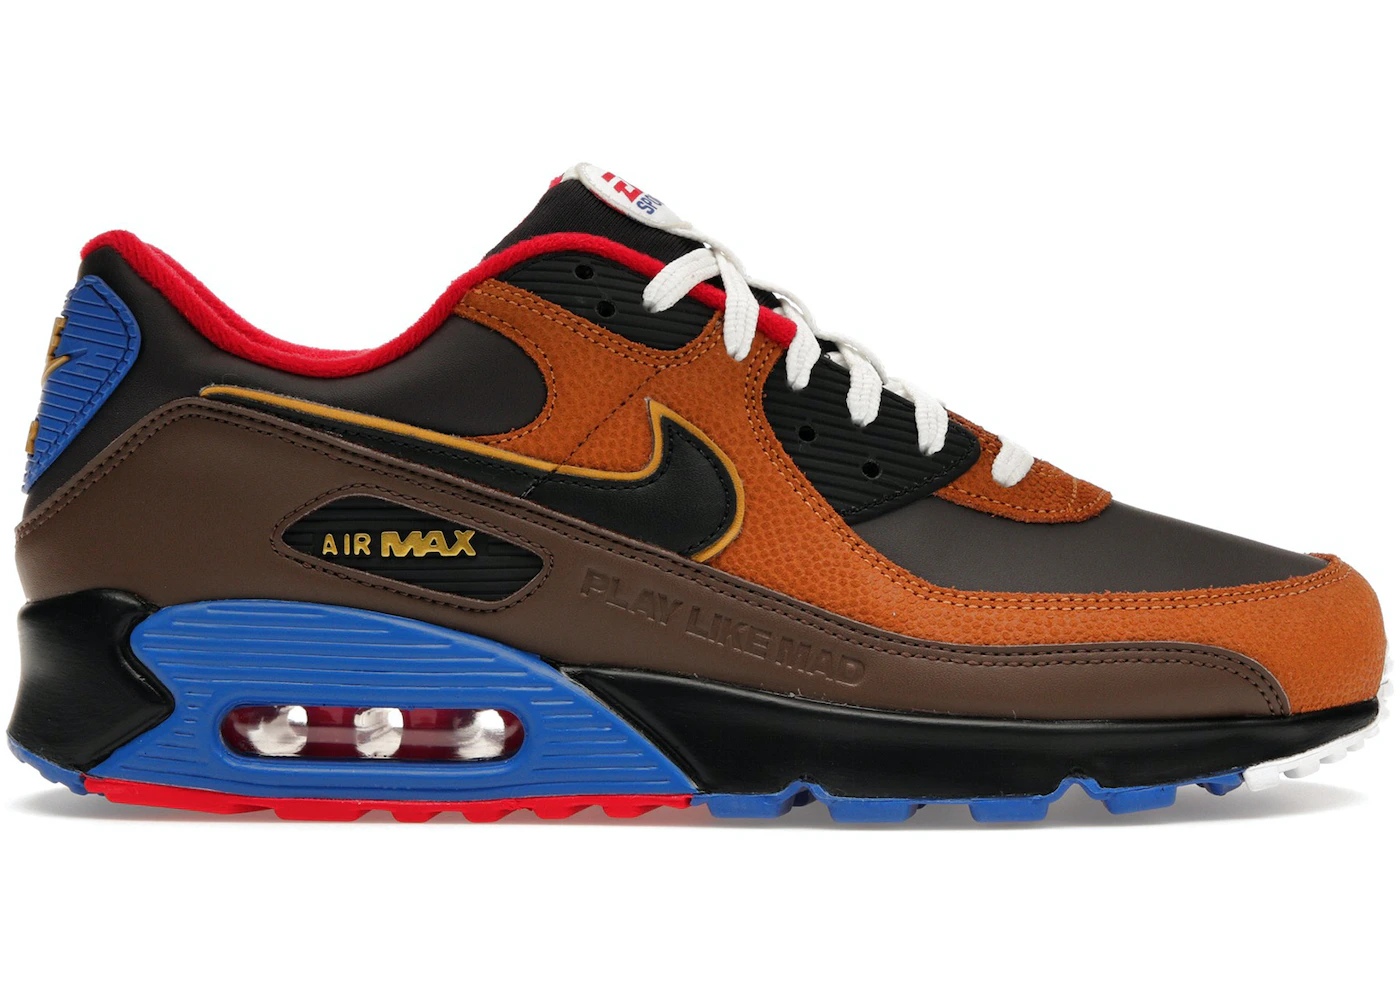 https://images.stockx.com/images/Nike-Air-Max-90-EA-Sports-Play-Like-Mad-Product.jpg?fit=fill&bg=FFFFFF&w=700&h=500&fm=webp&auto=compress&q=90&dpr=2&trim=color&updated_at=1694204604